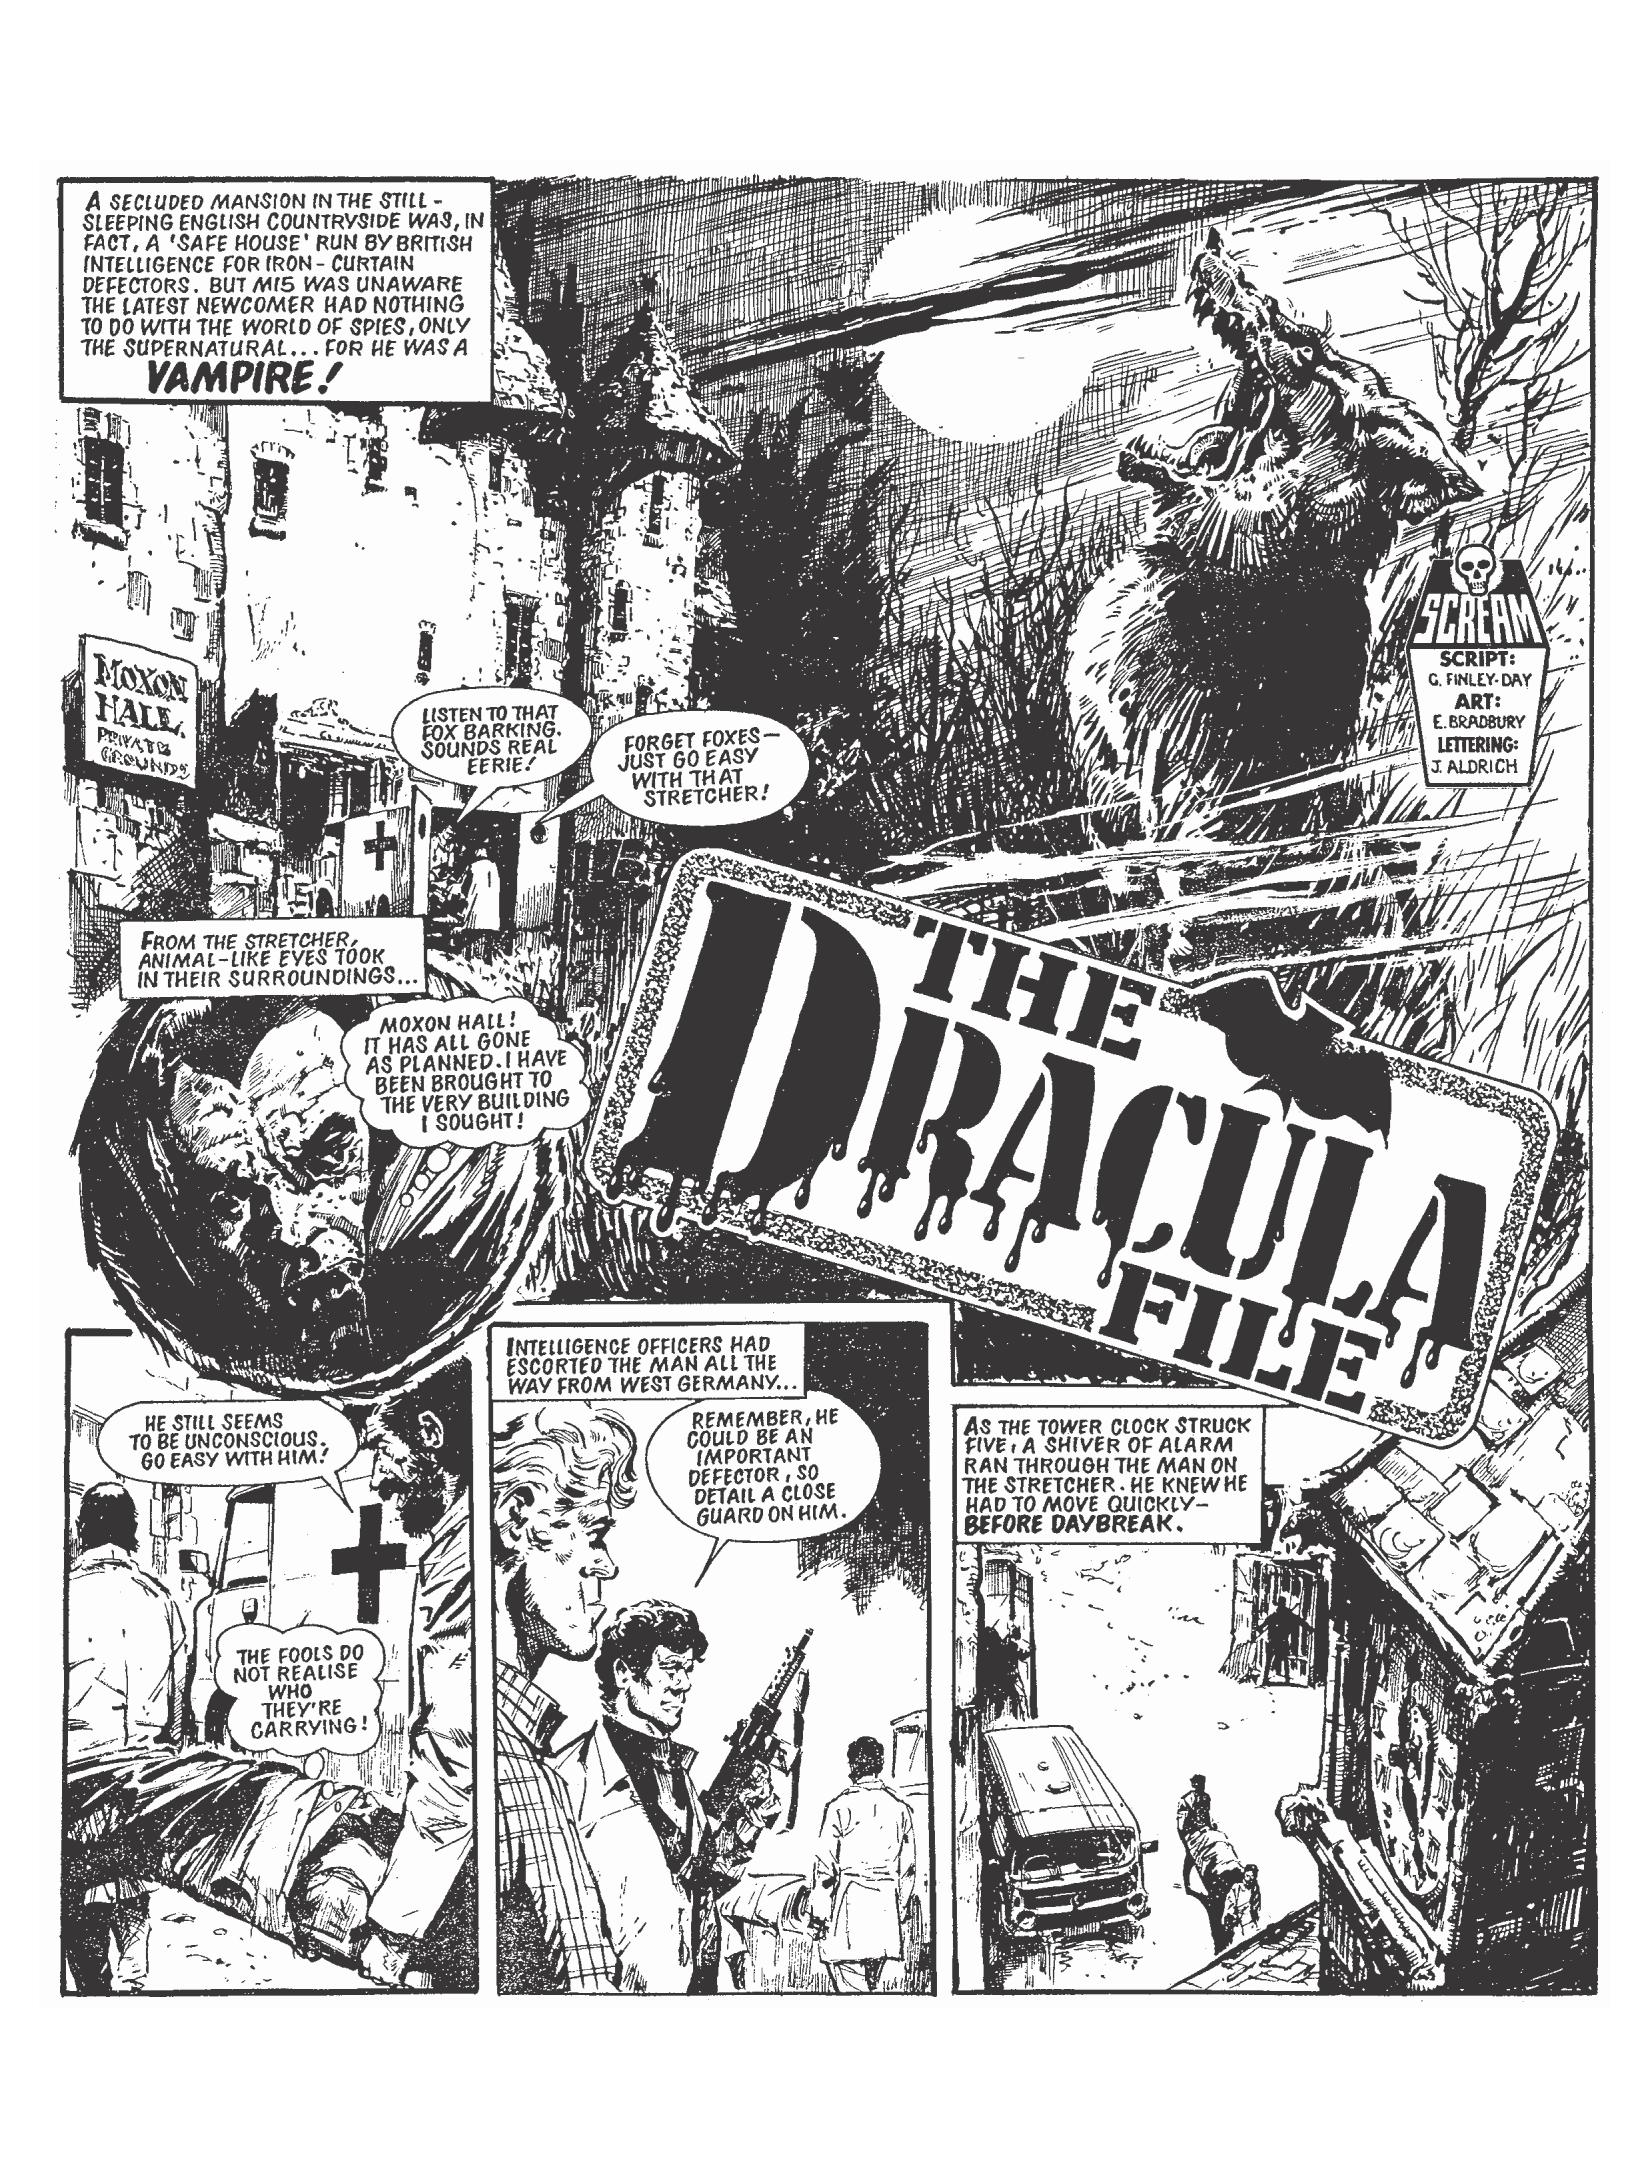 The Dracula File review